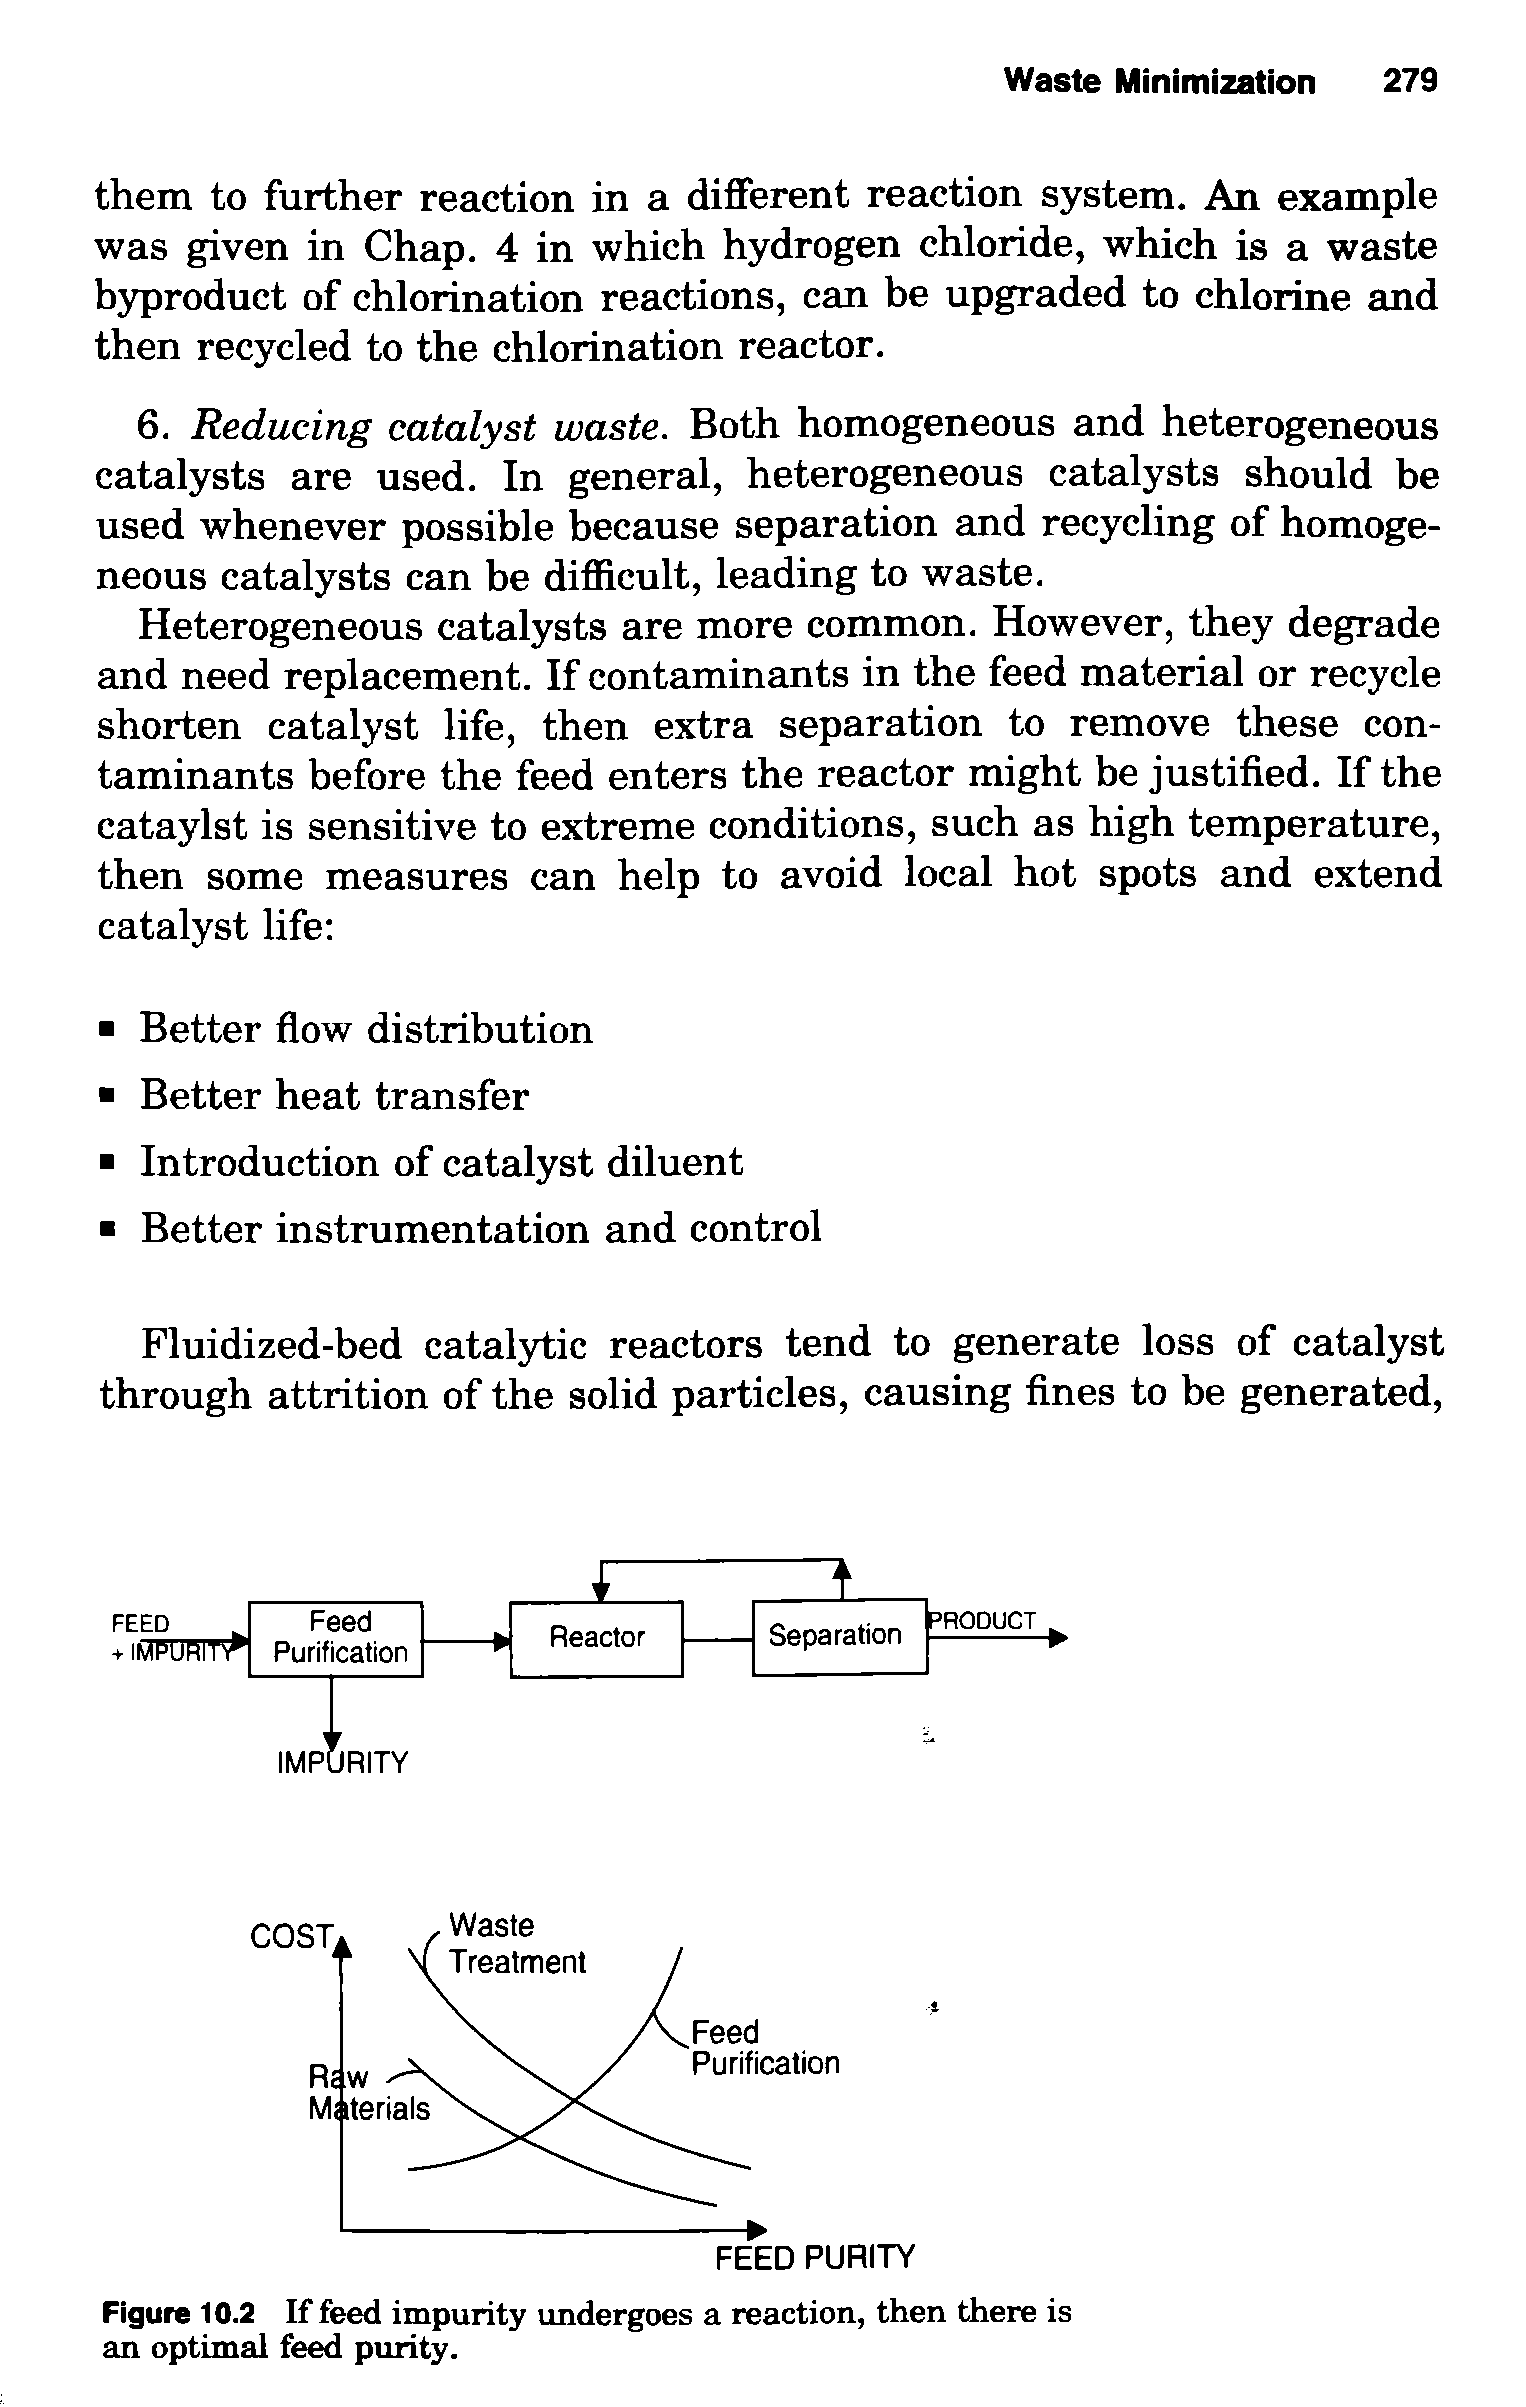 Figure 10.2 If feed impurity undergoes a reaction, then there is an optimal feed purity.